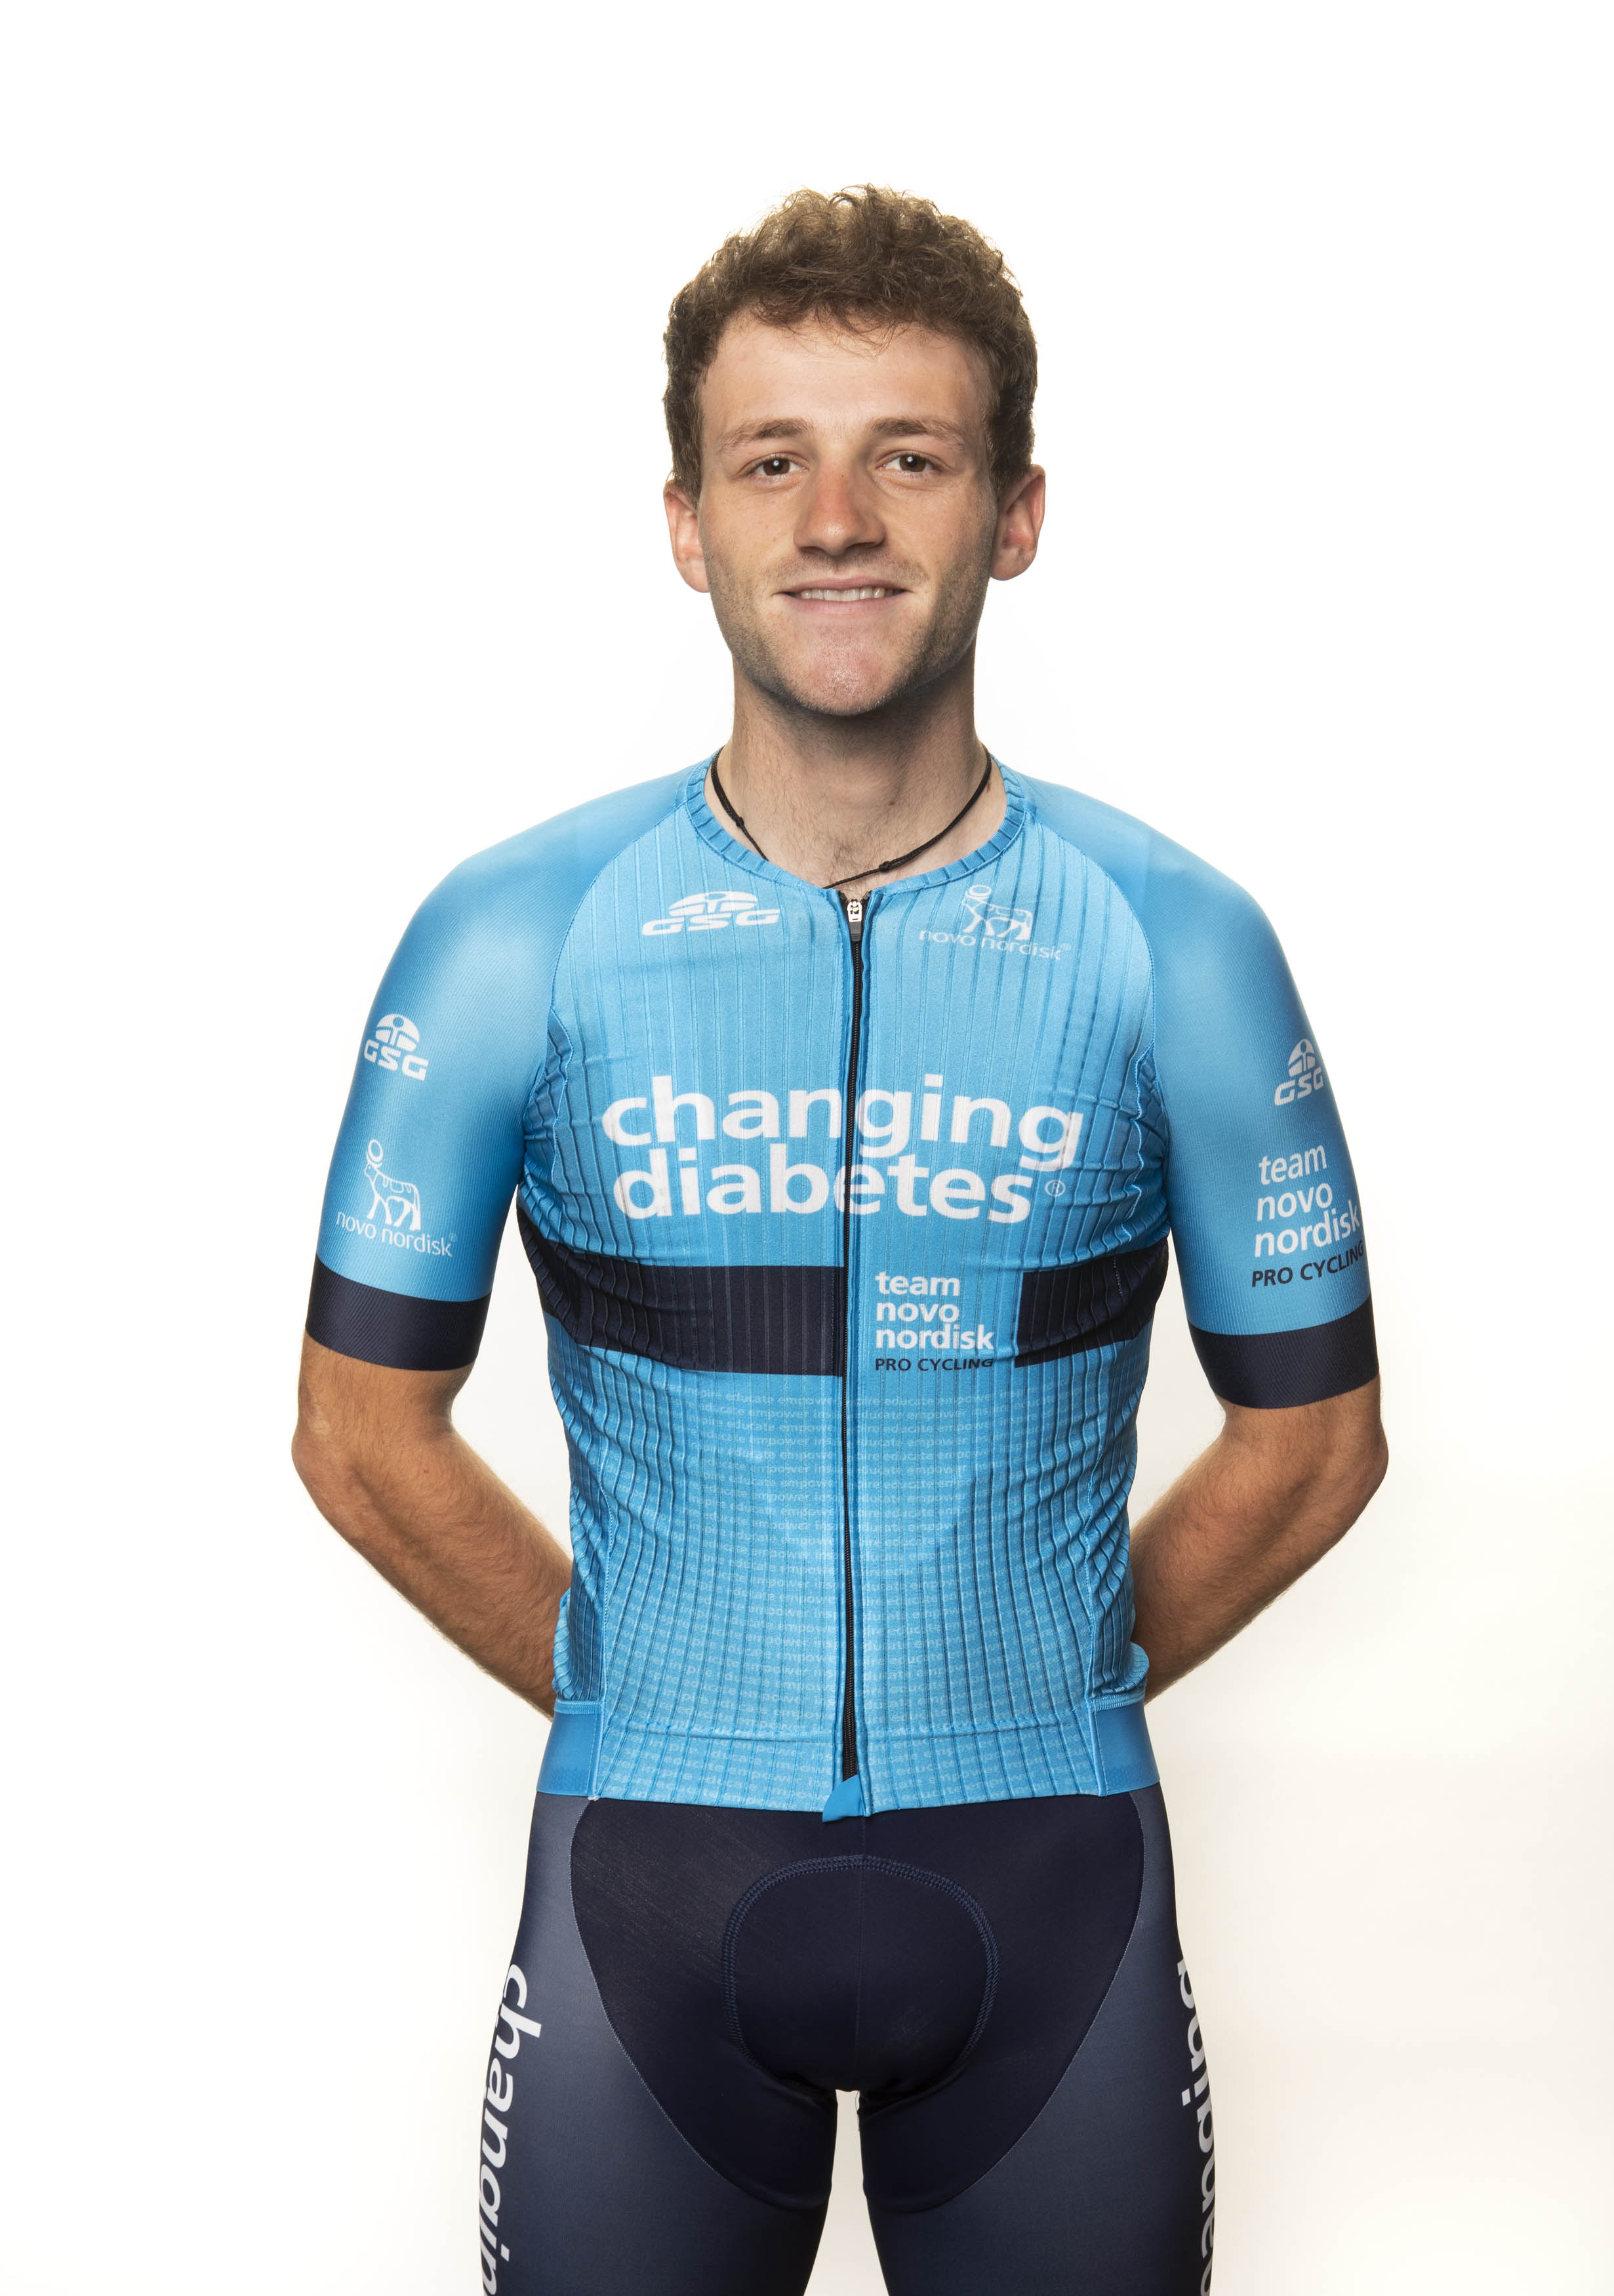 Hamish has raced for Team Novo Nordisk's junior and development squads.